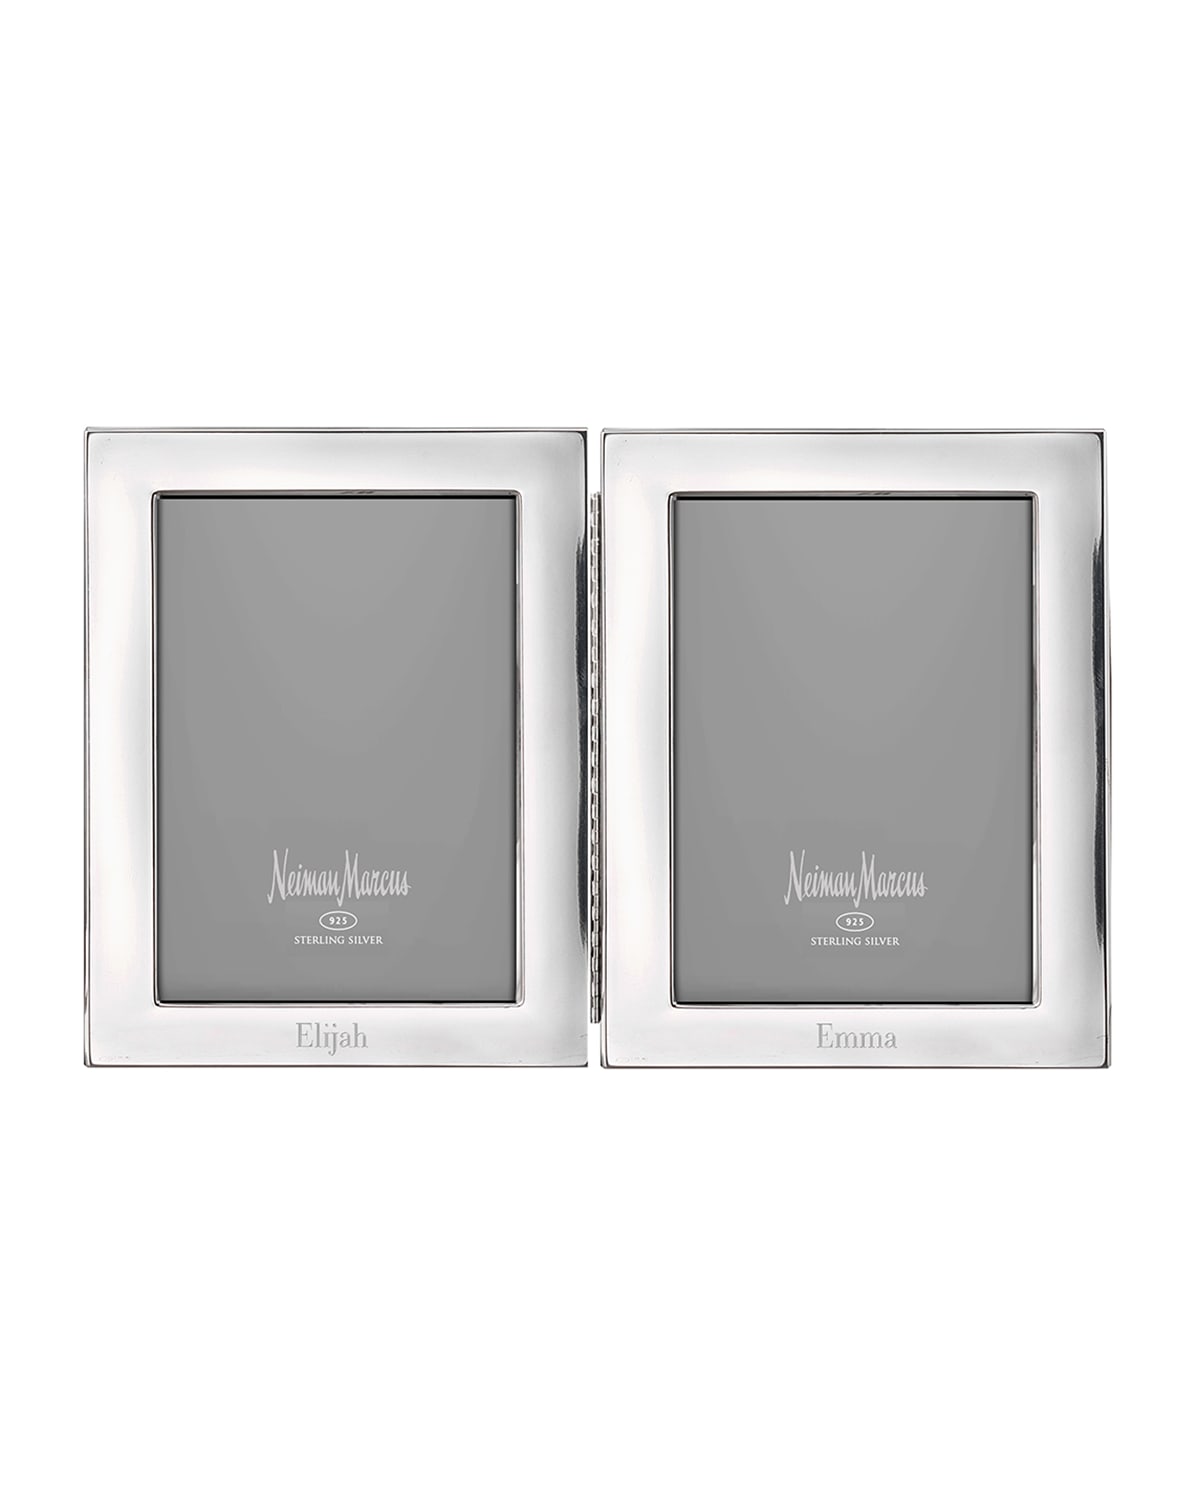 Cunill America Tiffany Plain Hinged Double Personalized Frame, 4" X 6" In Silver Block Font